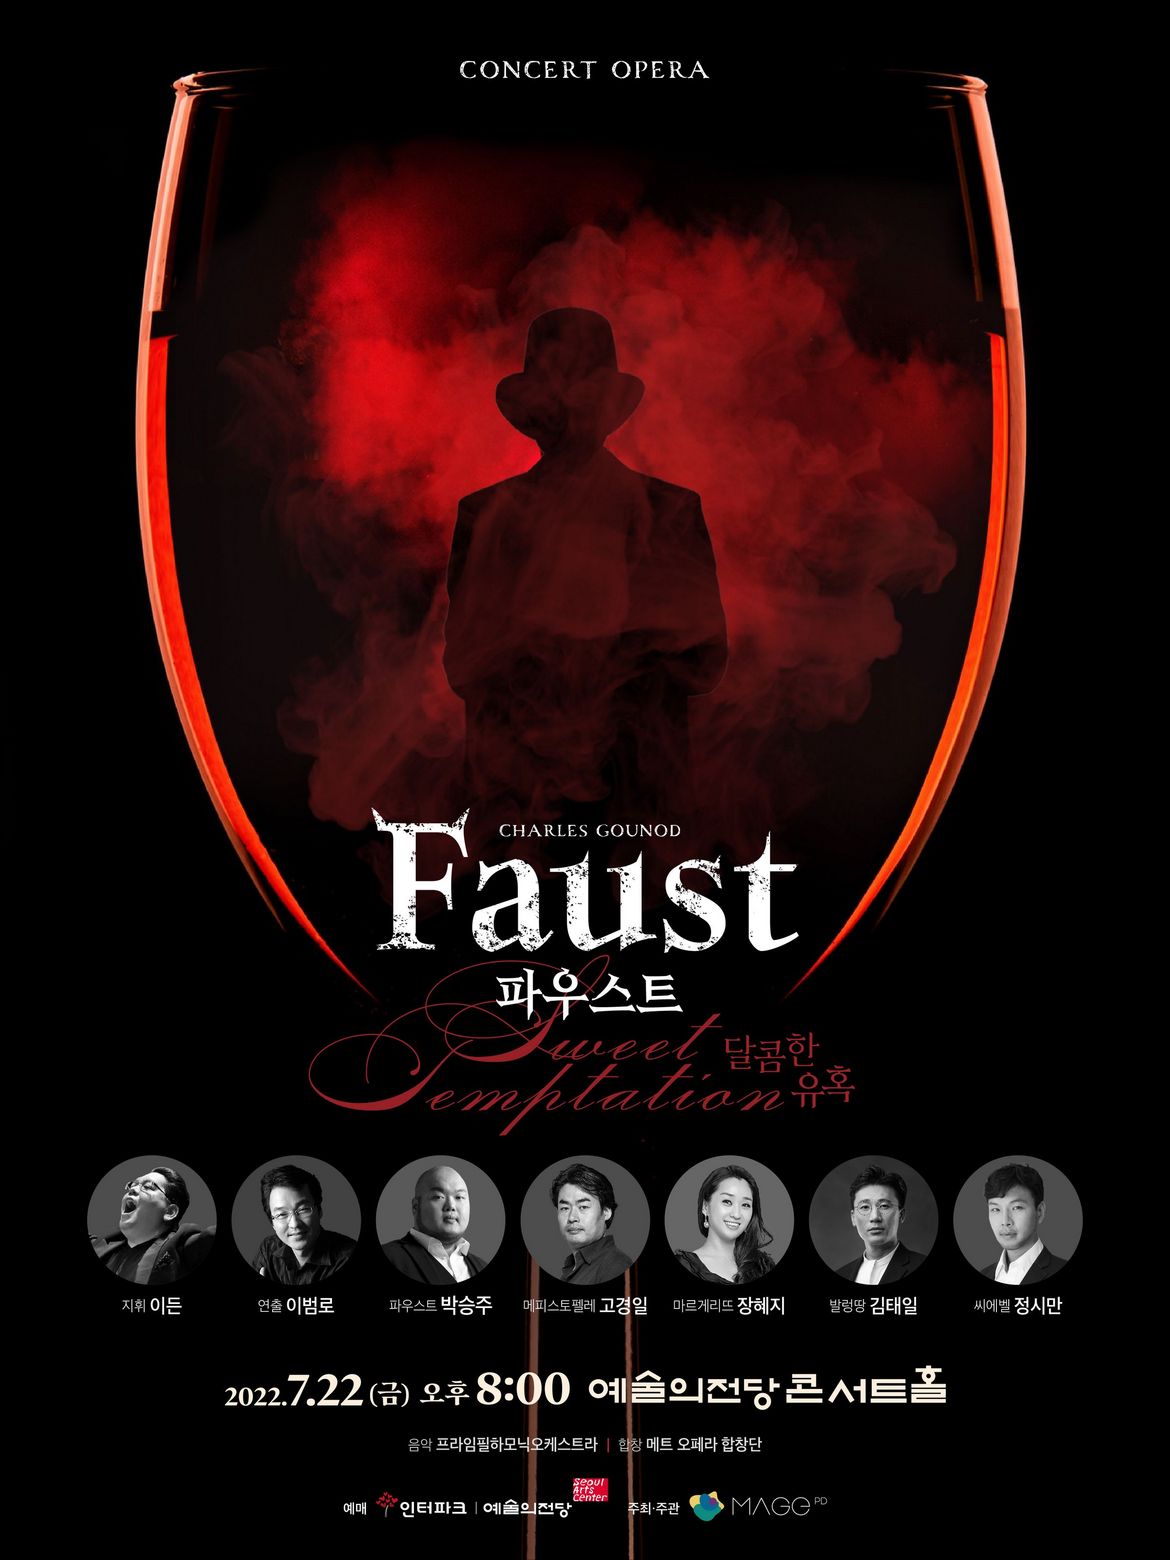 [Translate to Coréen:] <Faust : temptation> is the first opera project in 2022 held by MAGE production